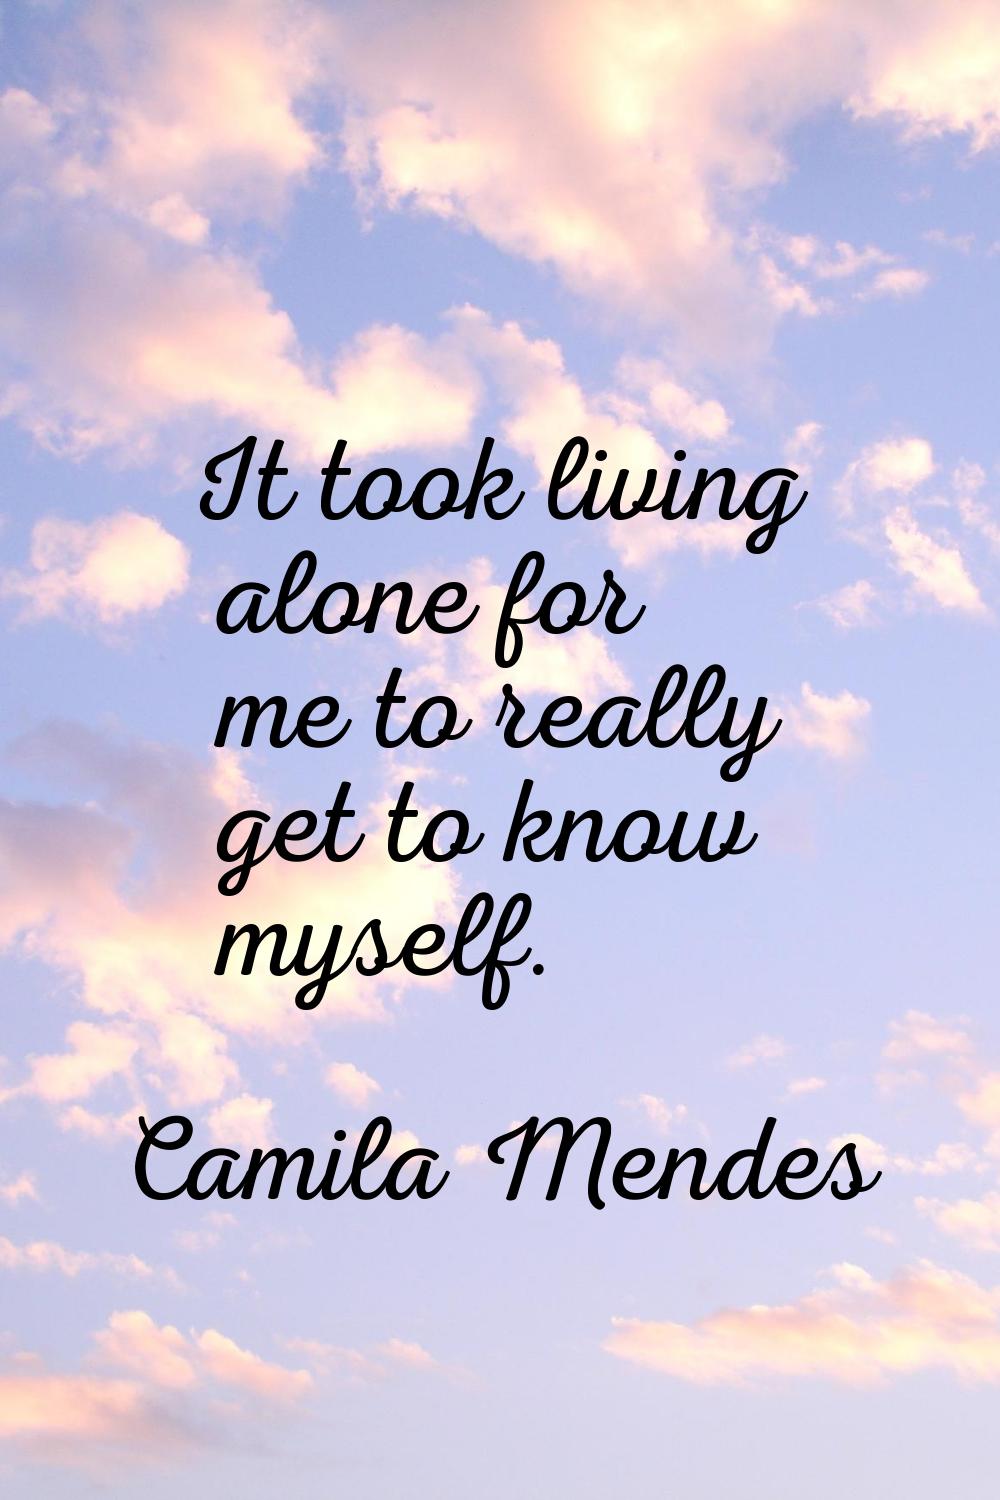 It took living alone for me to really get to know myself.